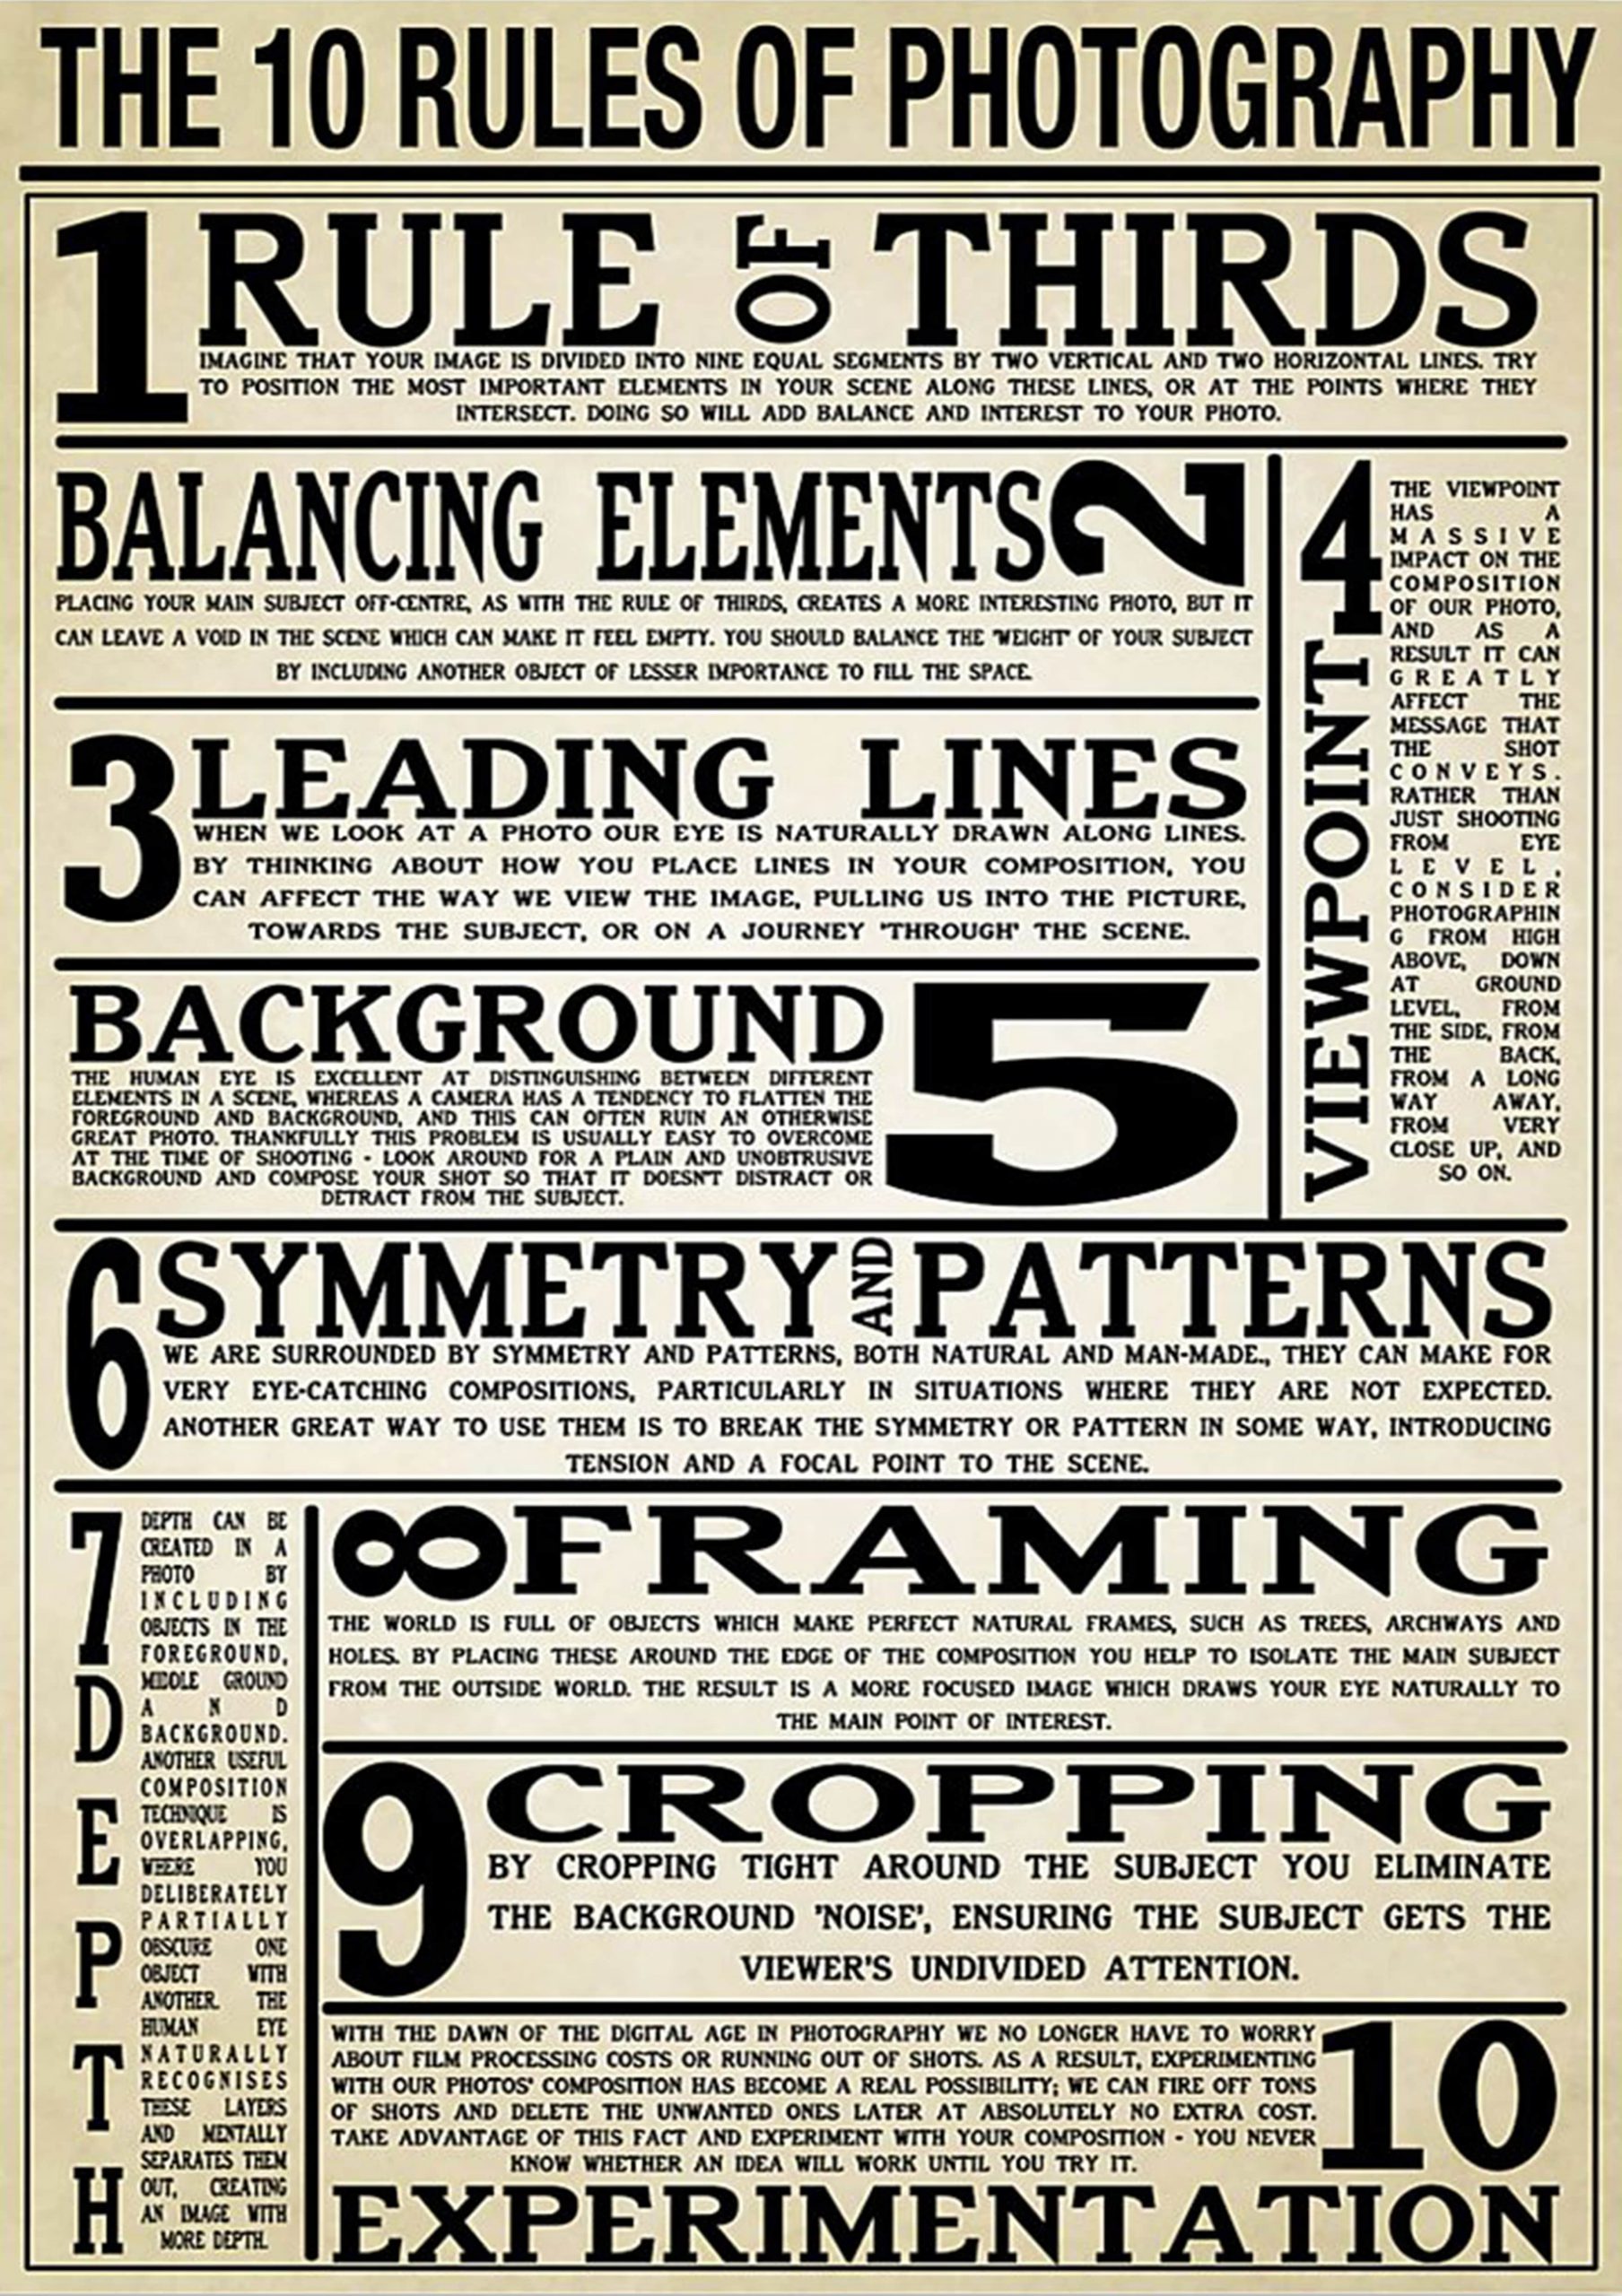 vintage the 10 rules of photography poster 1 - Copy (3)